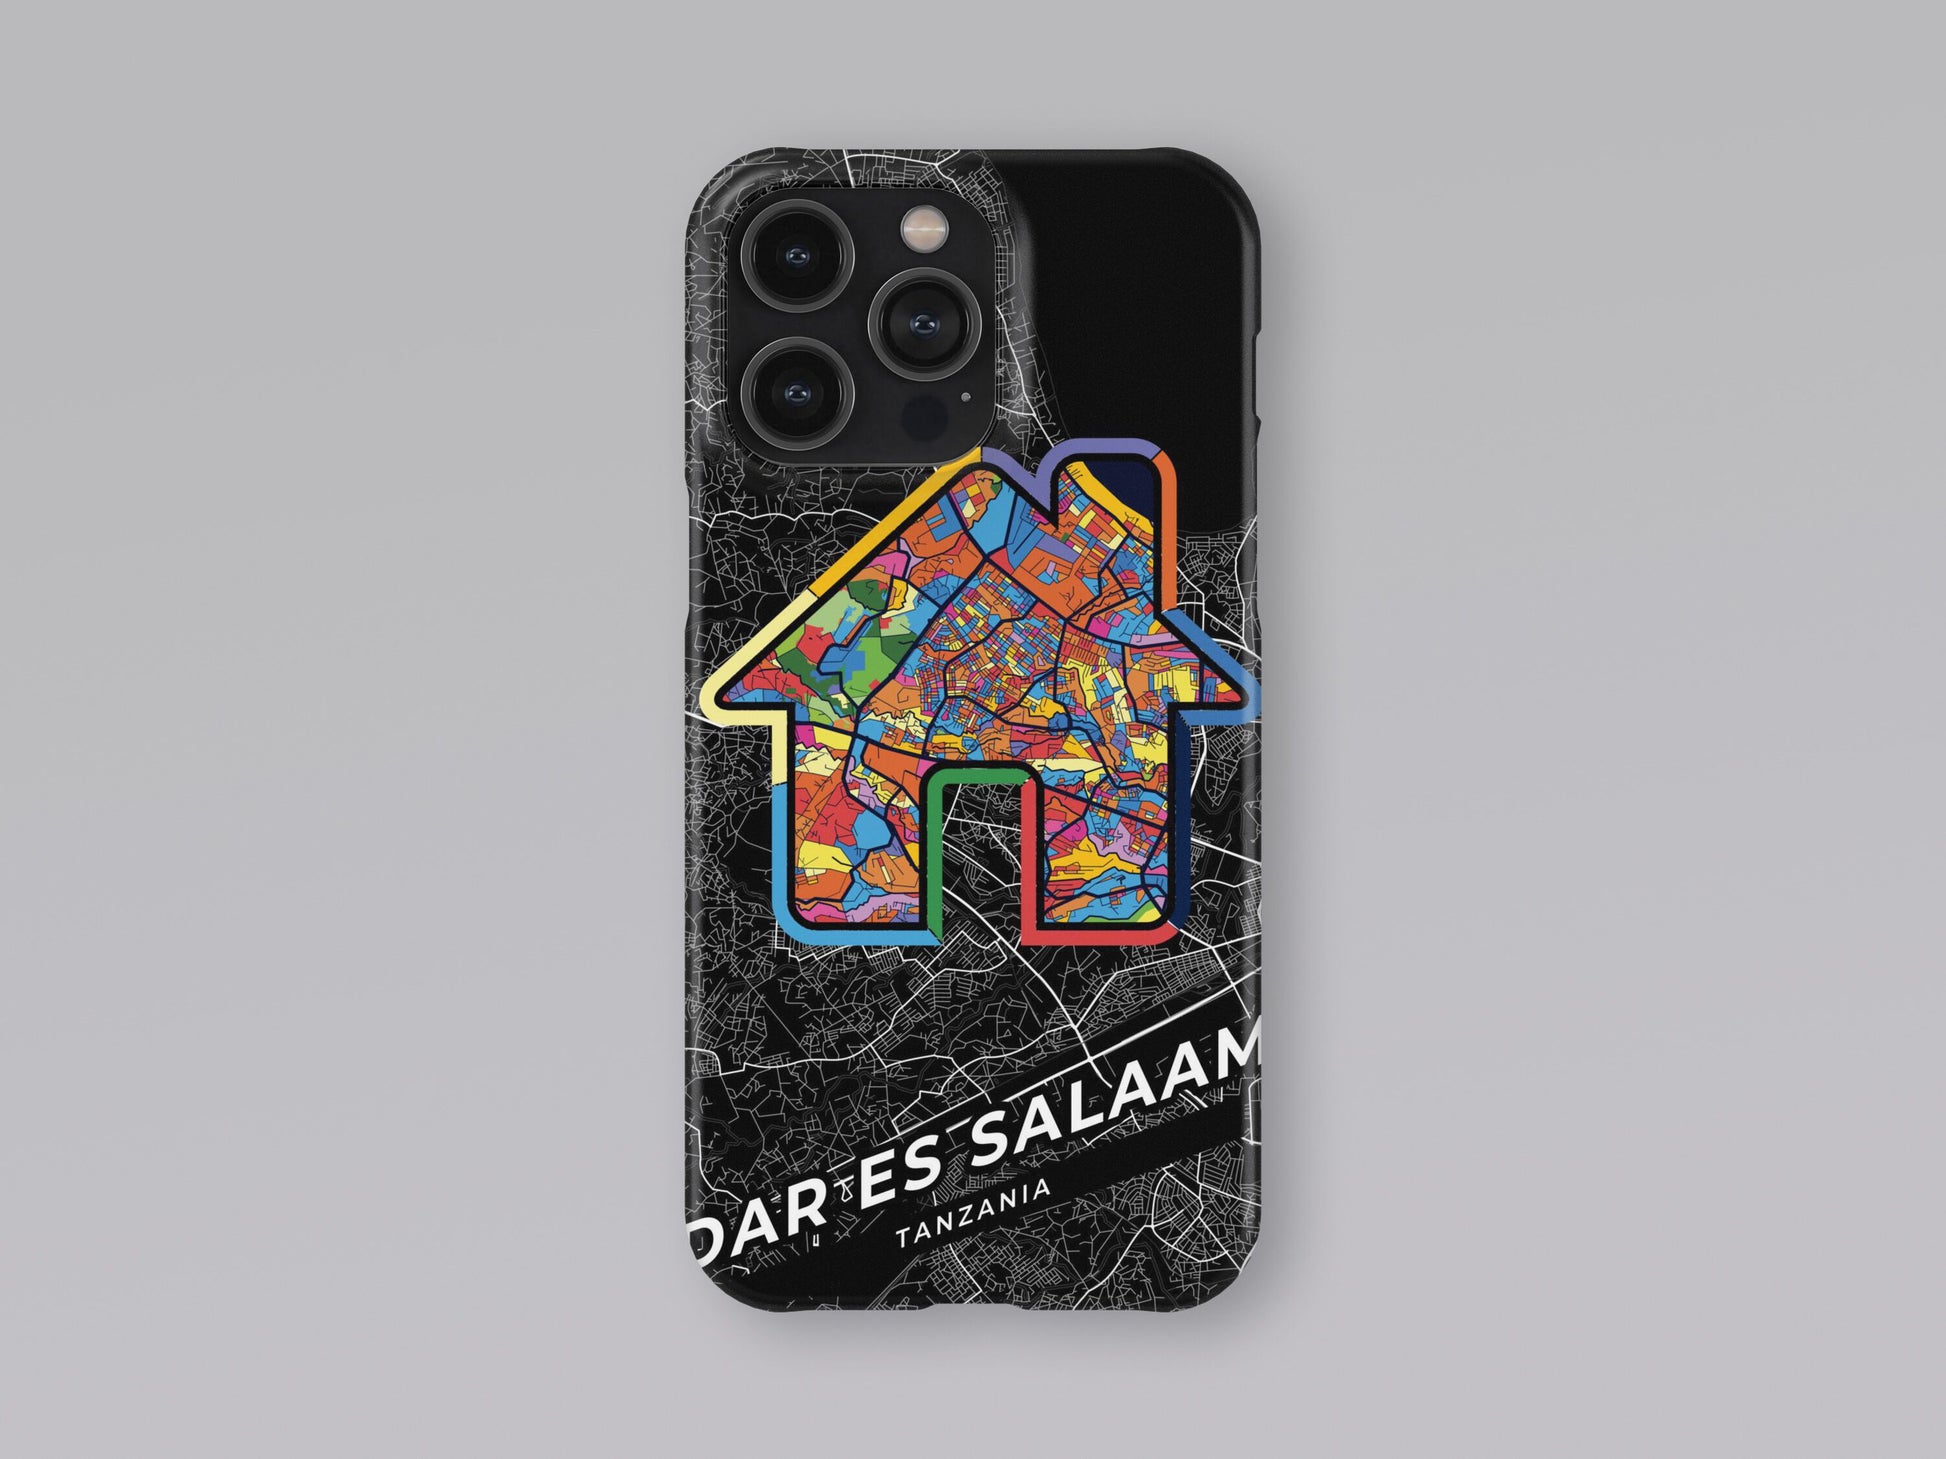 Dar Es Salaam Tanzania slim phone case with colorful icon. Birthday, wedding or housewarming gift. Couple match cases. 3